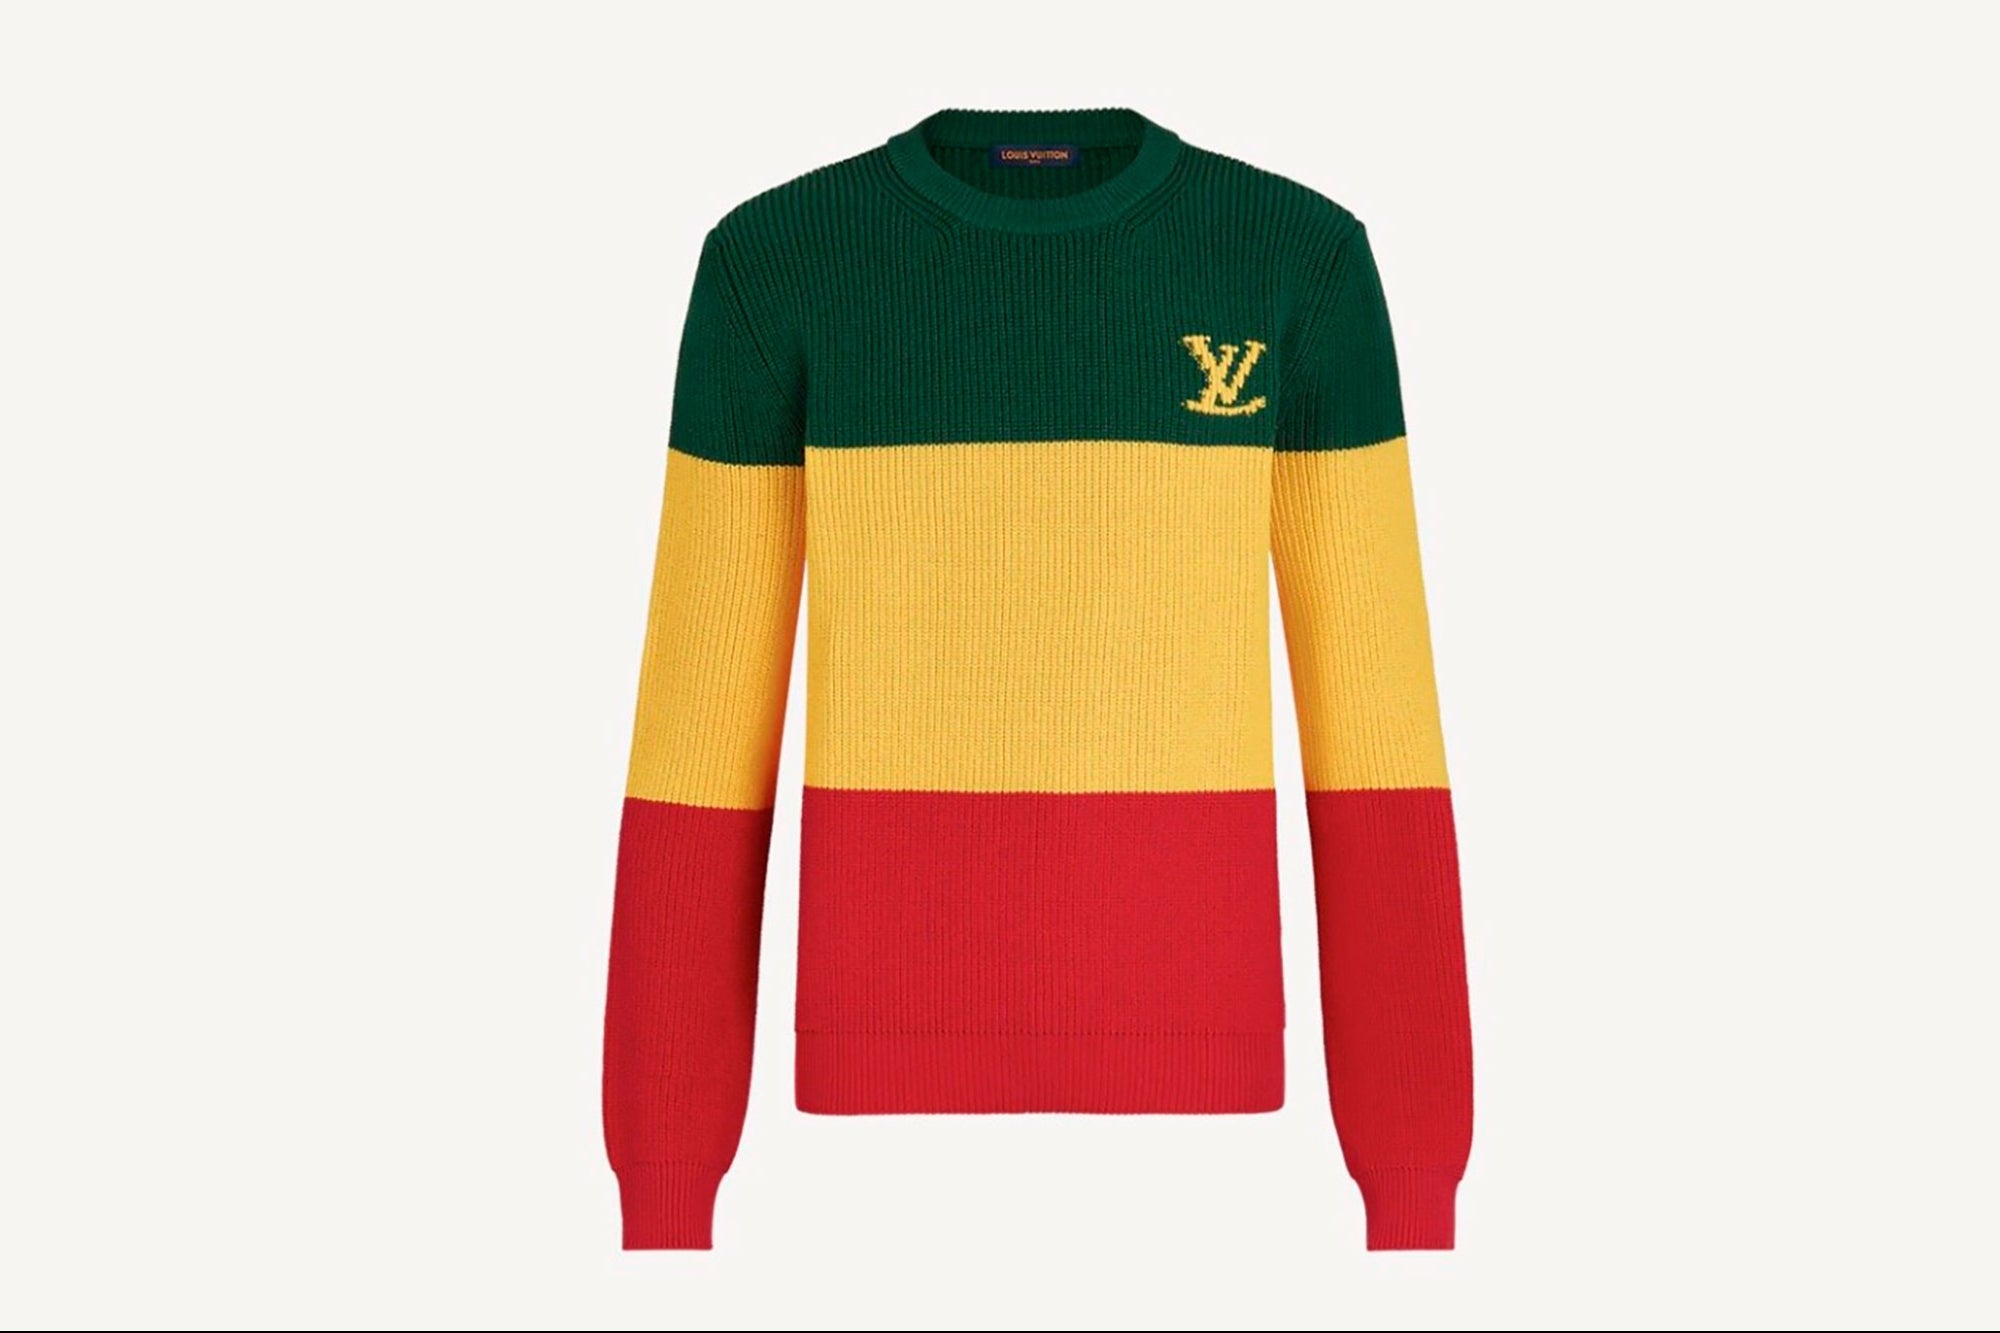 Louis Vuitton Launches 'Jamaica-Inspired' Sweater, But Gets Colors ...